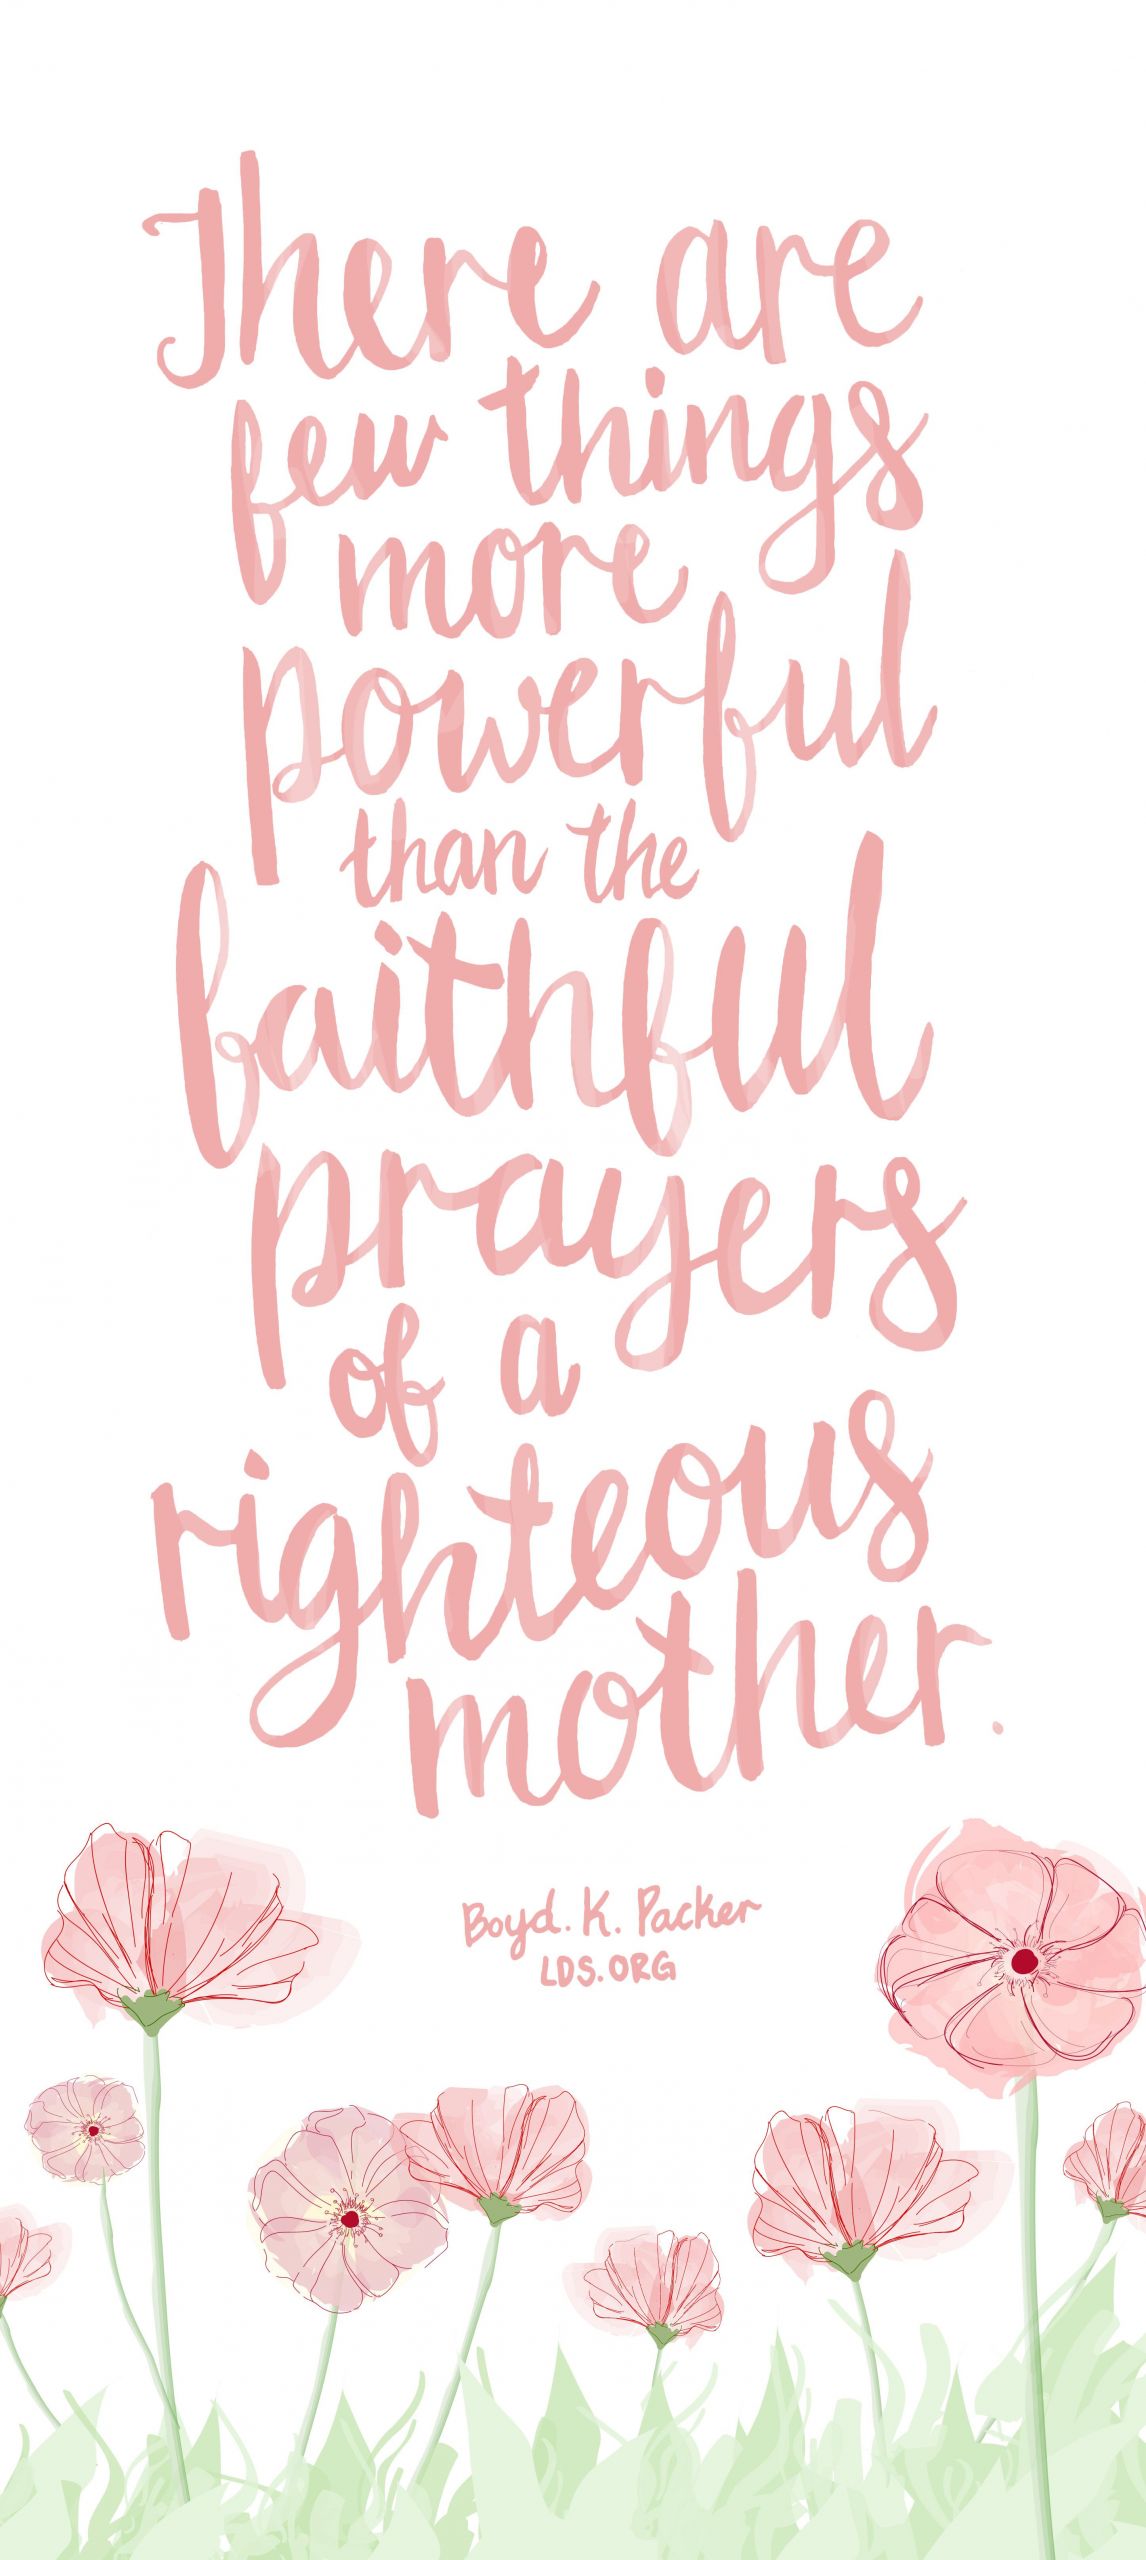 Lds Quotes About Mothers
 There are few things more powerful than the faithful